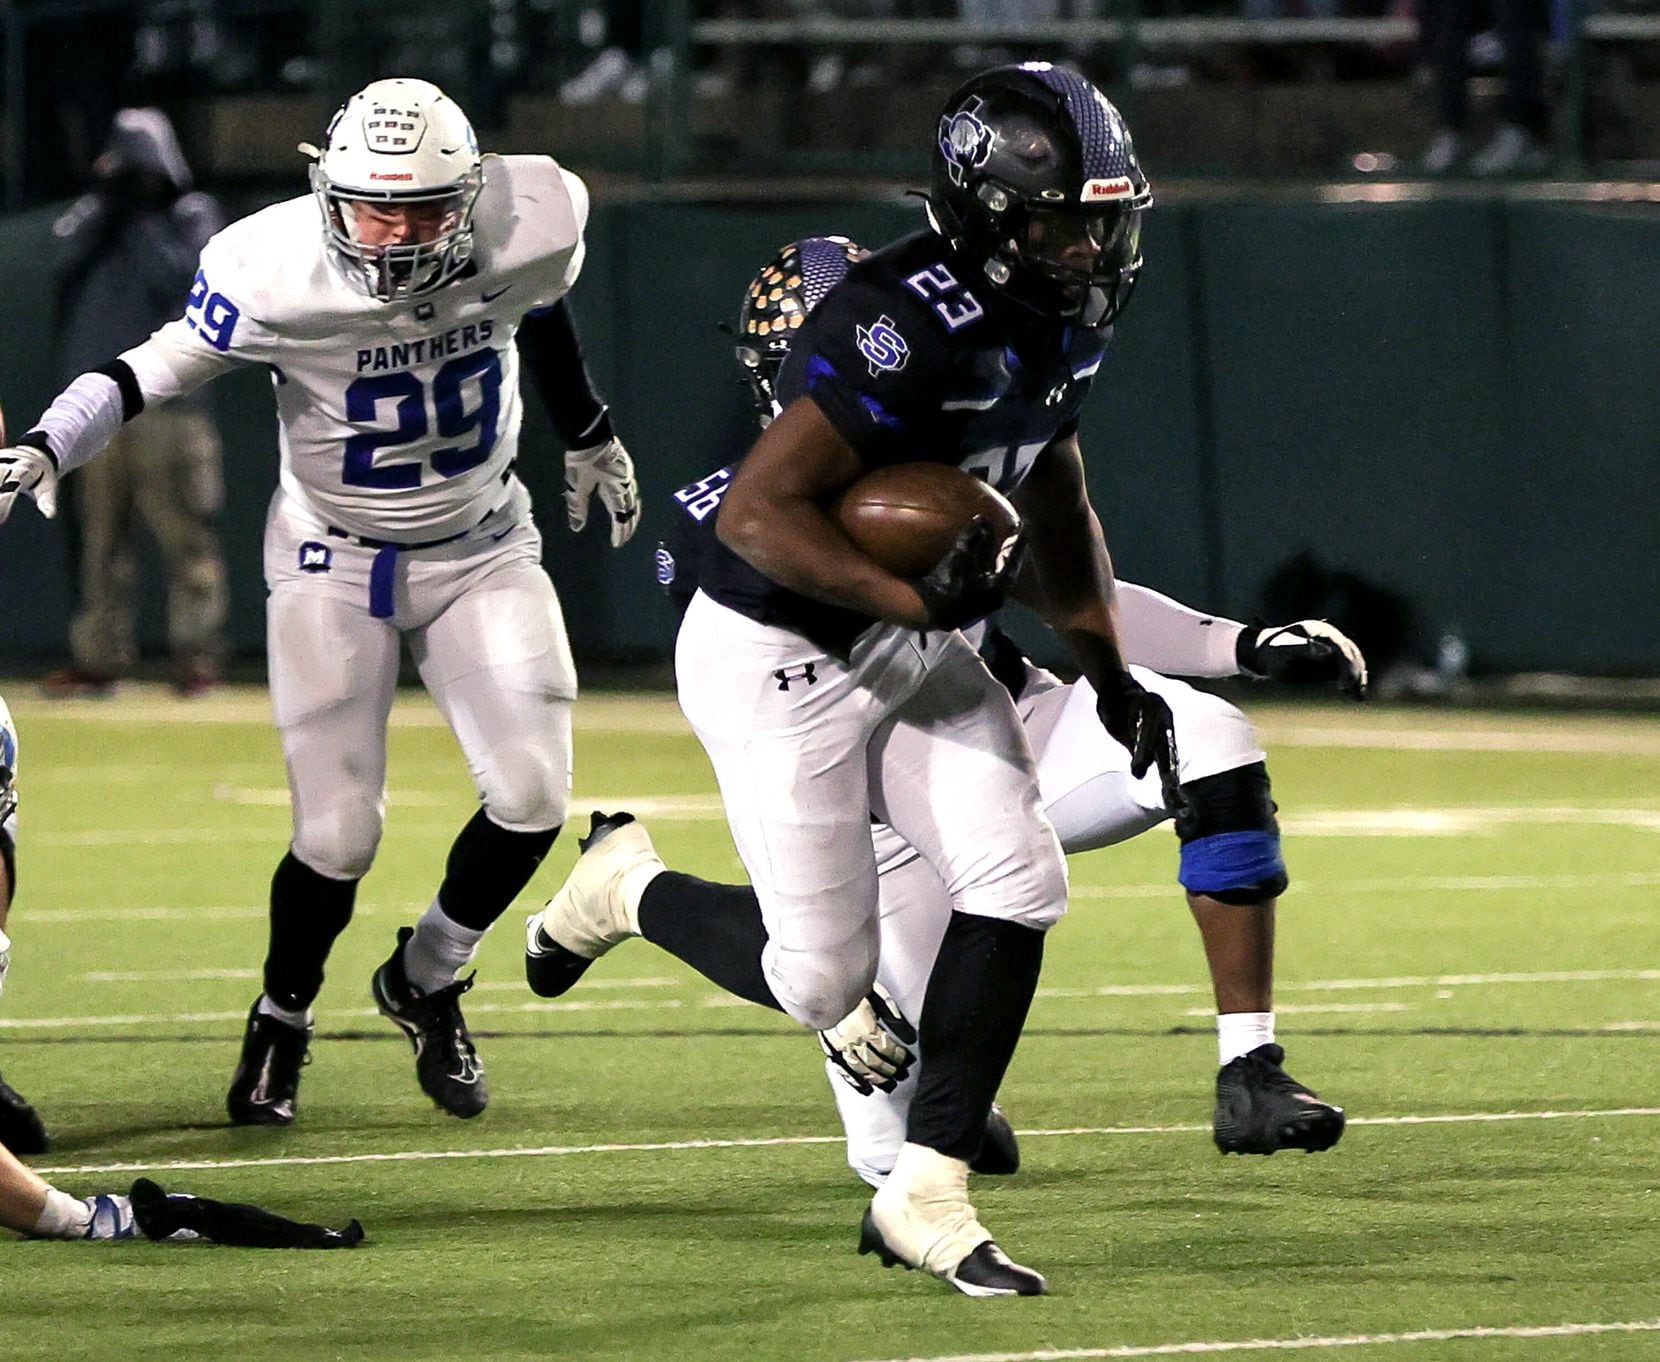 Mansfield Summit running back Orlando Scales finds a huge hole to run and goes the distance for a touchdown against Midlothian during the second half of the 5A Division I Region I semifinal high school football playoff game played on November 26, 2021 at Gopher-Warrior Bowl in Grand Prairie.  (Steve Nurenberg/Special Contributor)